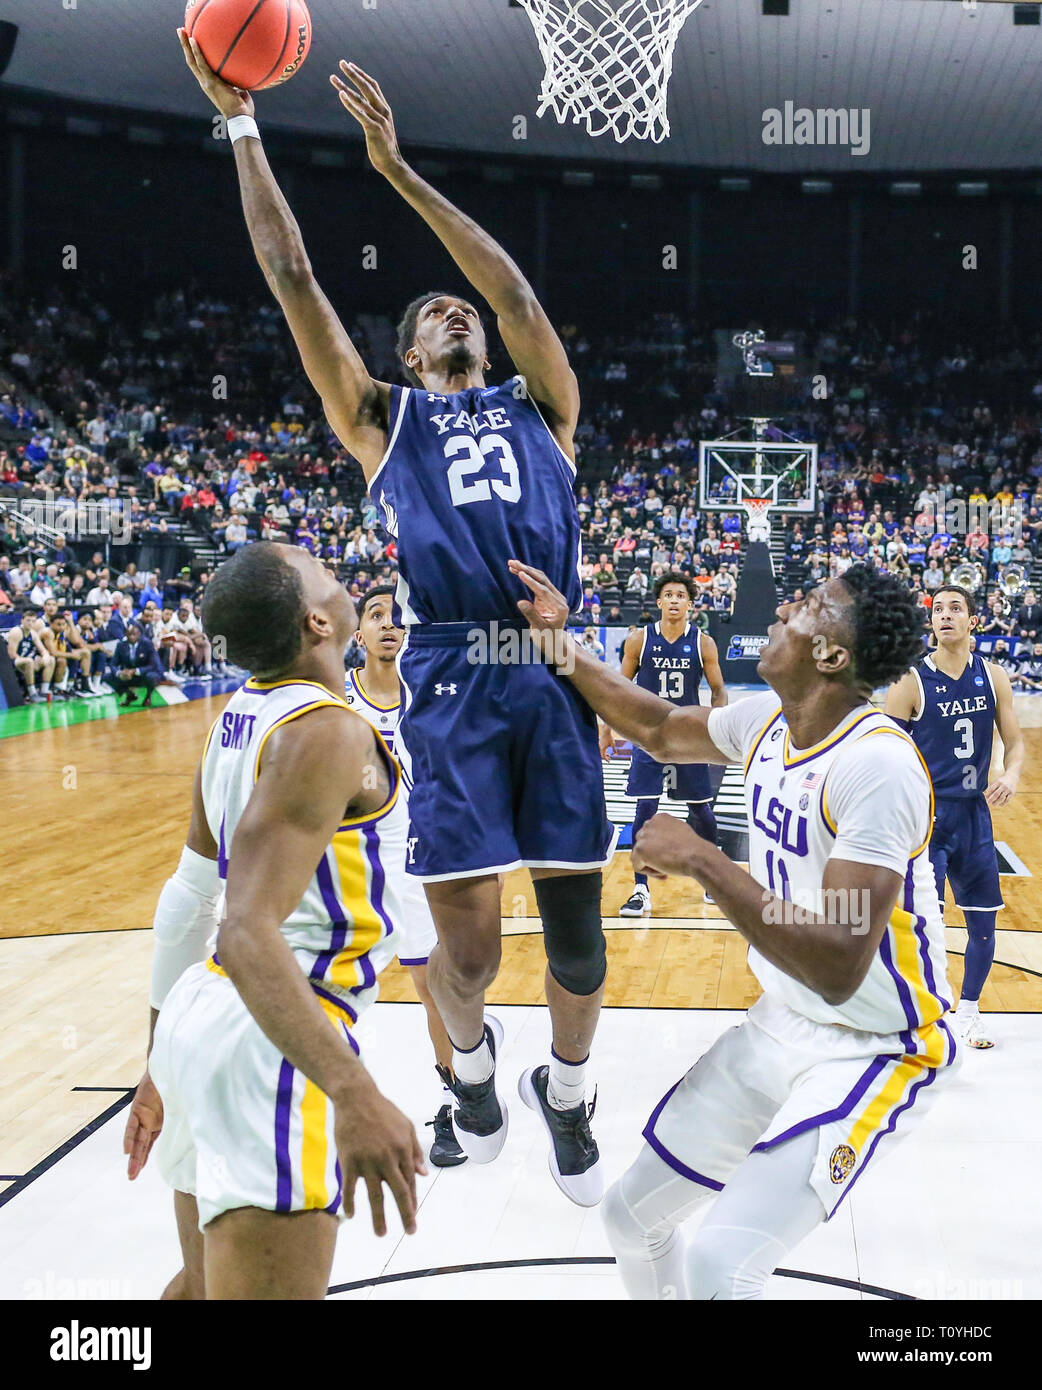 Yale Bulldogs forward Jordan Bruner (23) shoots the ball during the first  half of an NCAA college tournament basketball game against the LSU Tigers  in Jacksonville, Fla., Thursday, March 21, 2019. (Gary